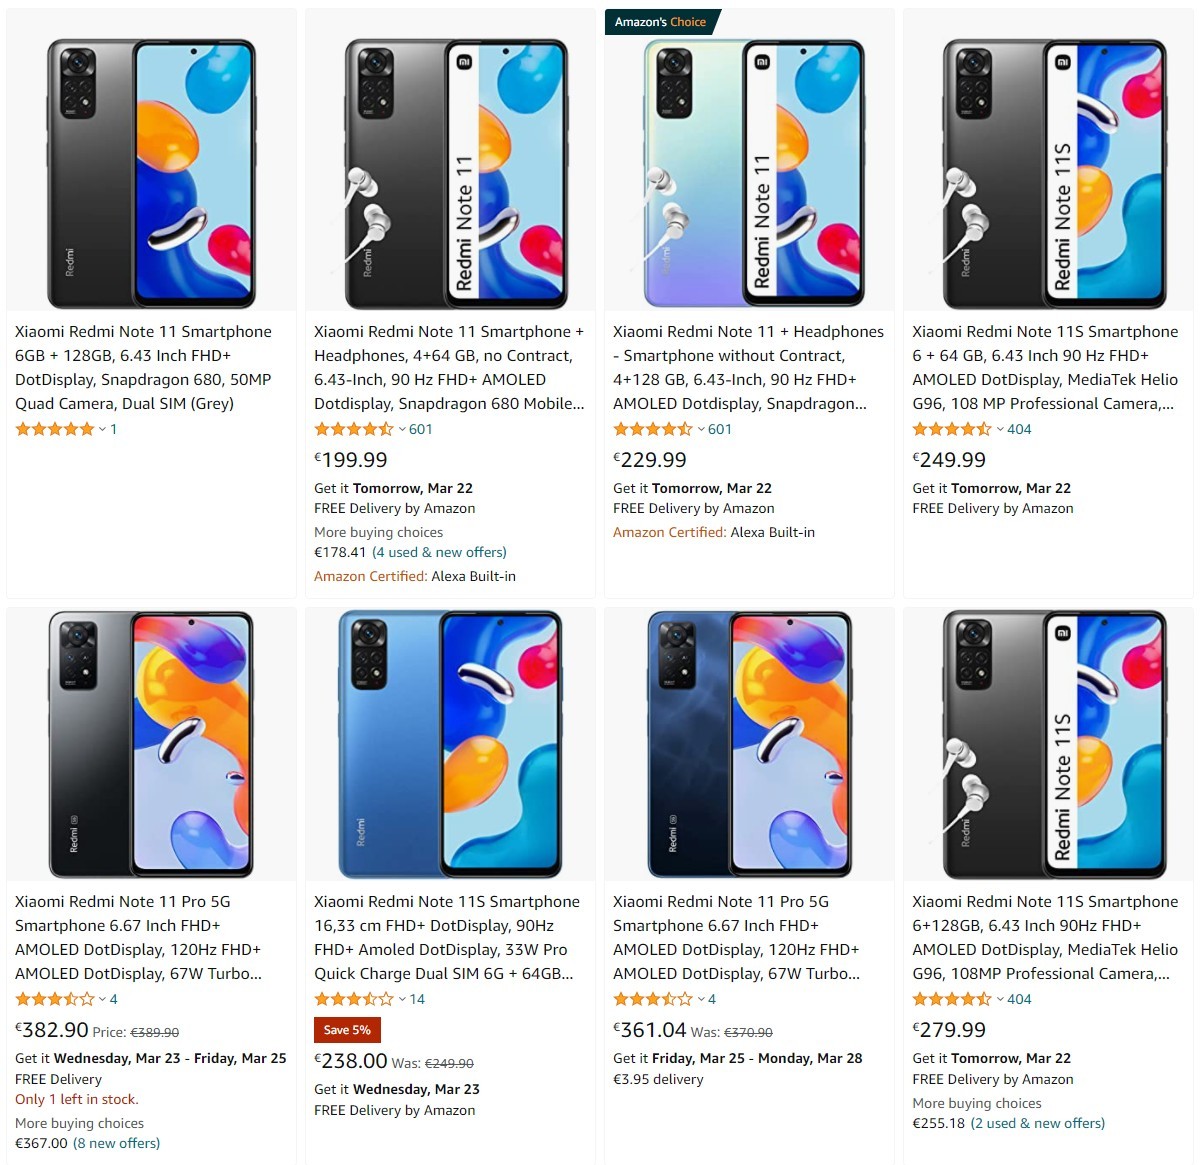 Trying to buy a Redmi Note 11 from Amazon - choose wisely